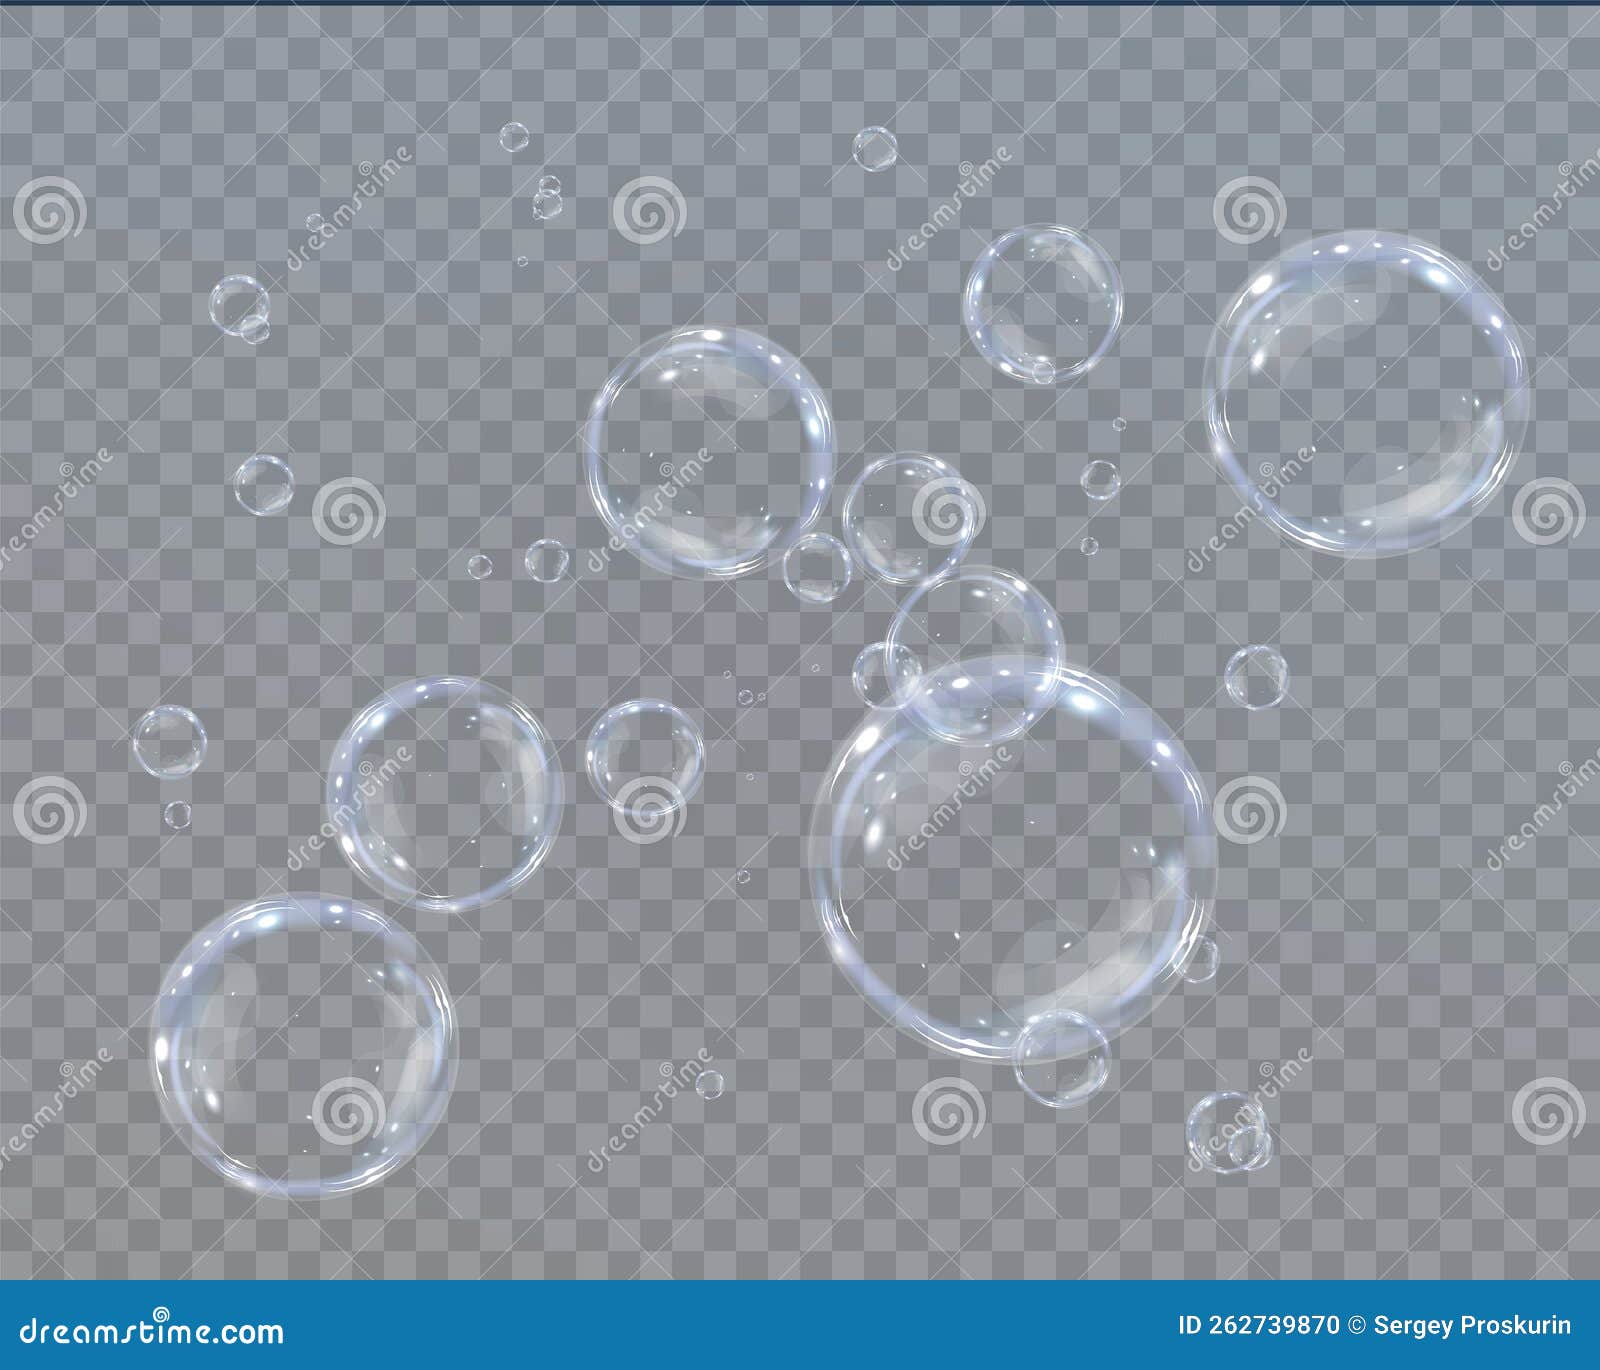 Collection of Realistic Soap Bubbles. Bubbles are Located on a